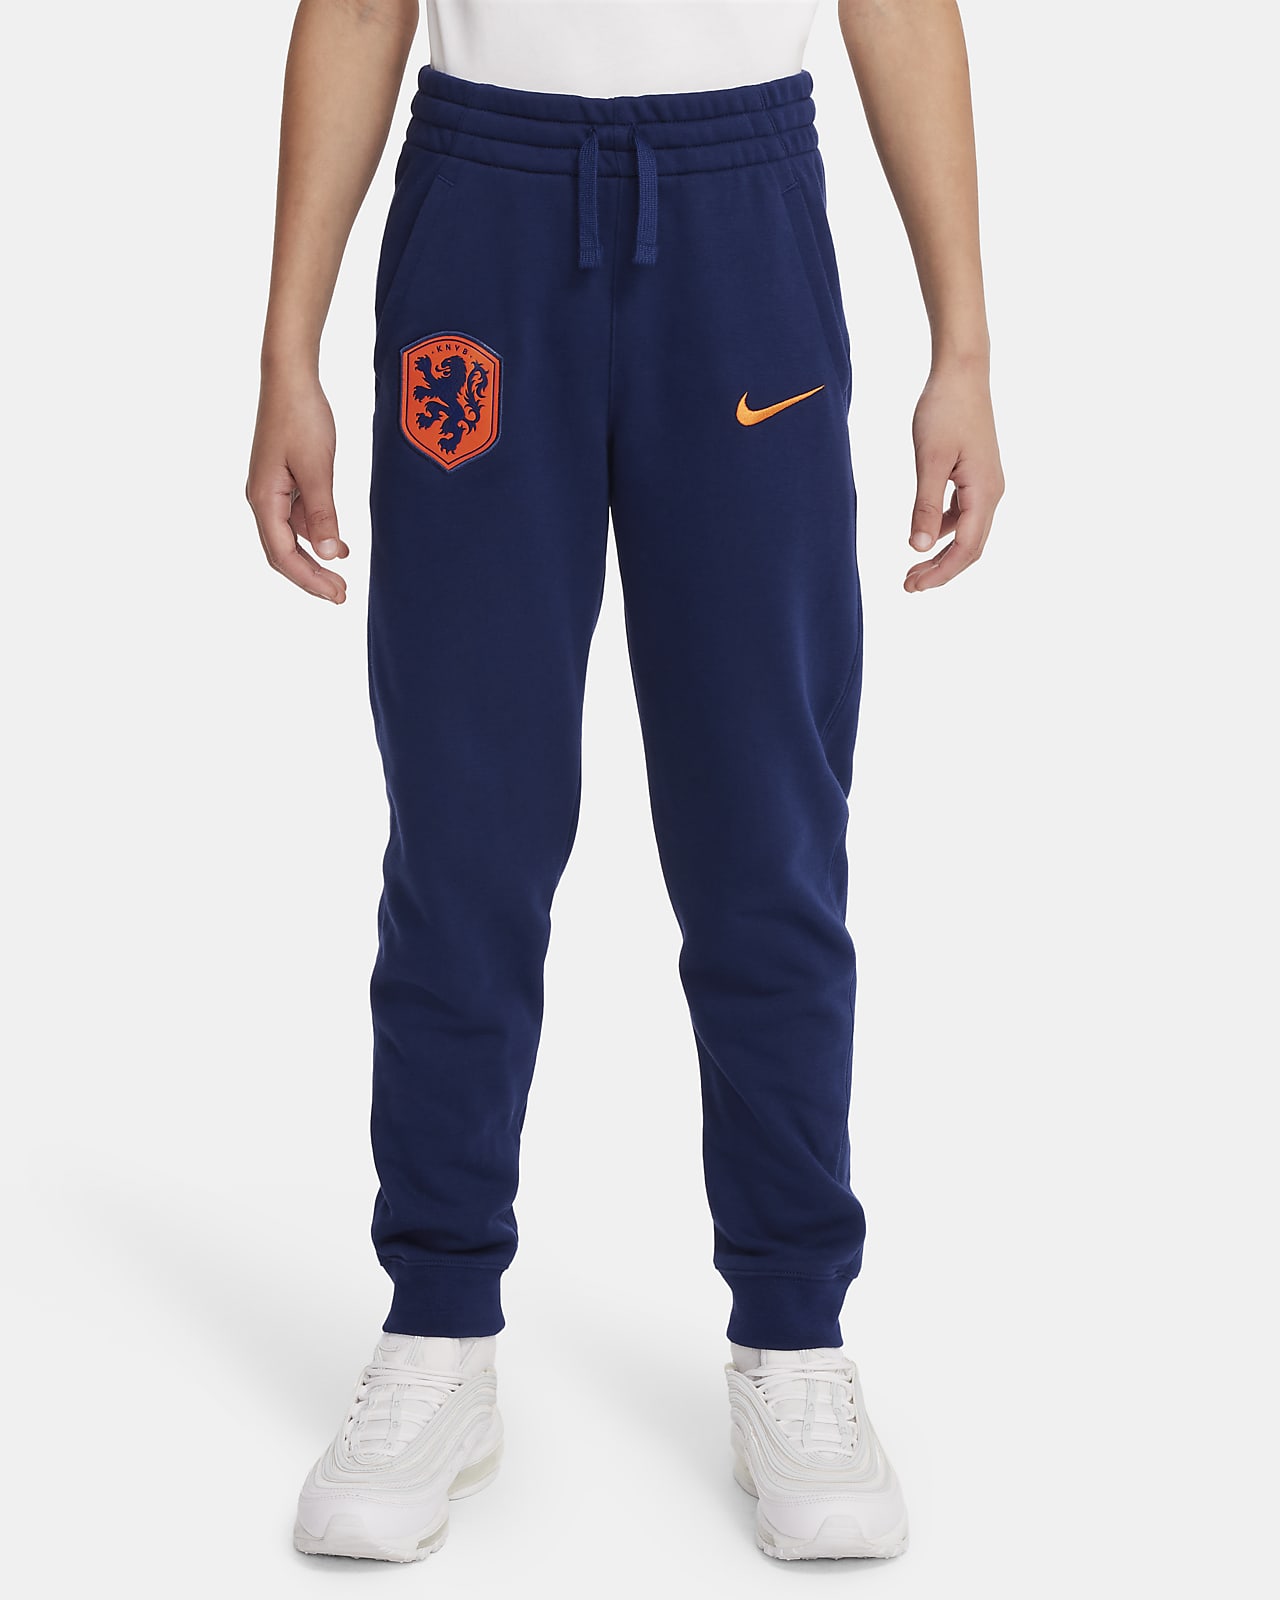 Netherlands Older Kids' (Boys') French Terry Joggers